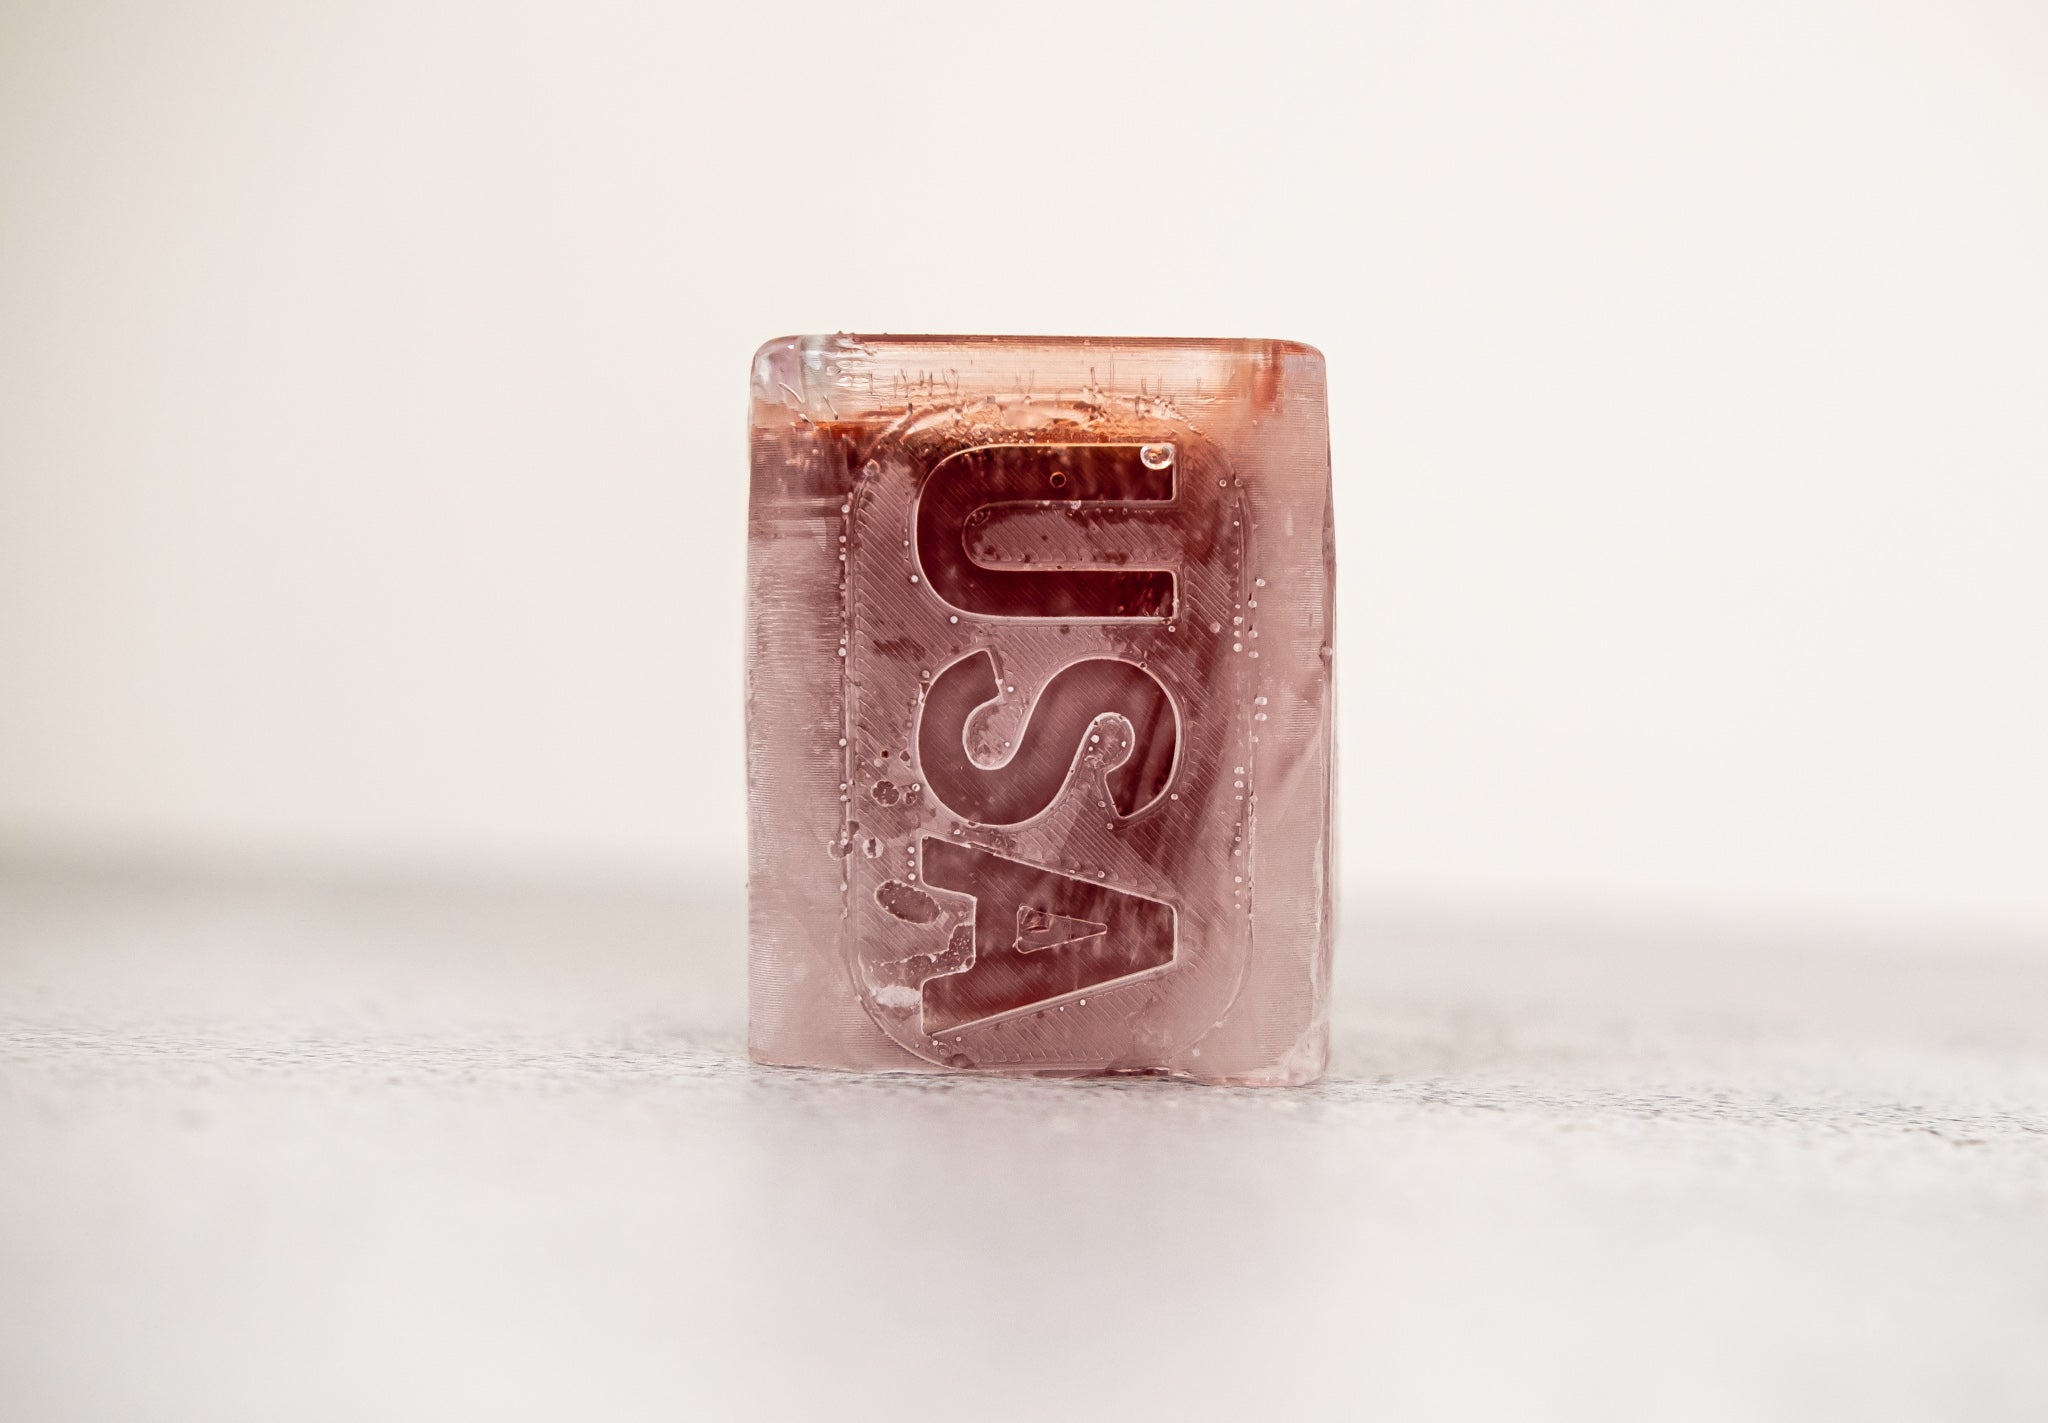 We are loving our custom ice cube trays with the #Siligrams logo on it